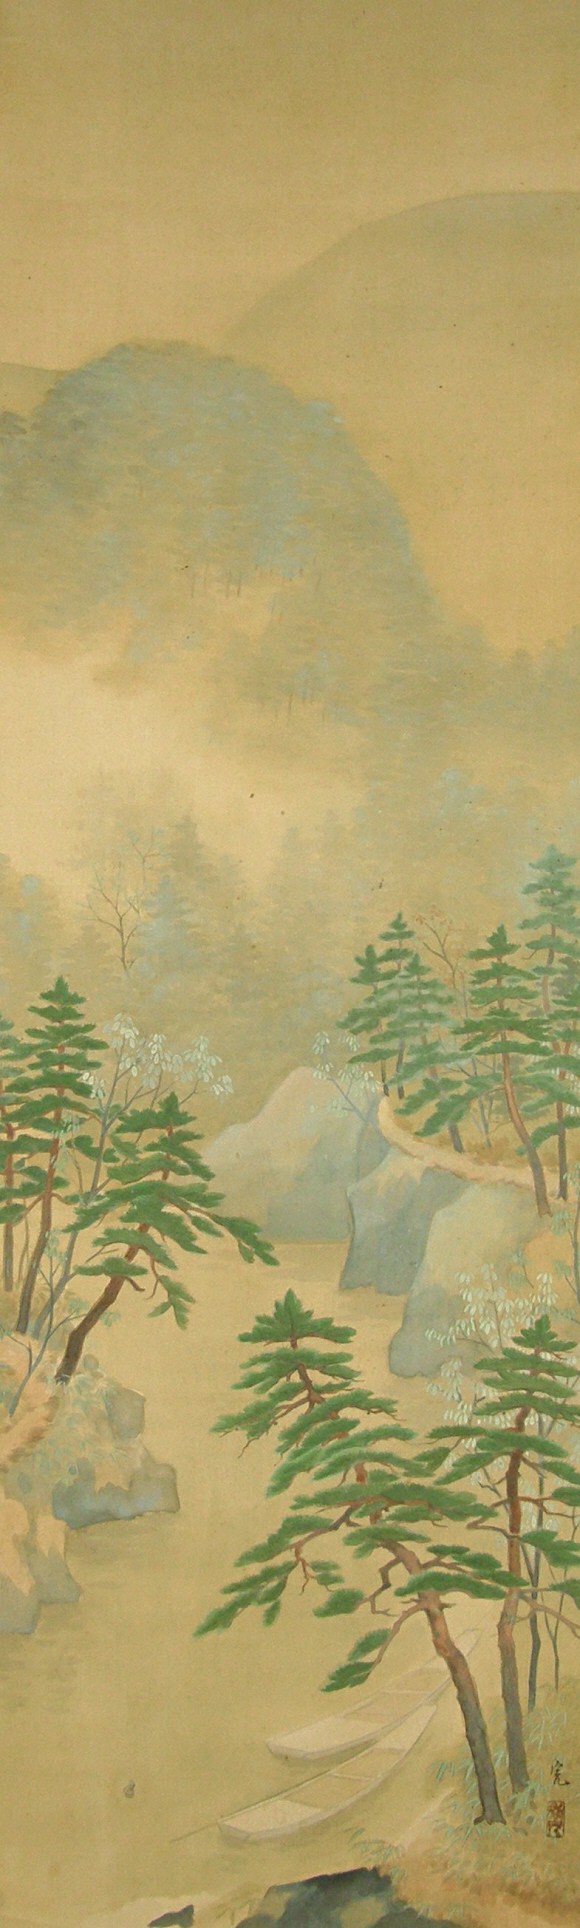 SS-10160 [ Arashiyama Valley in Summer ] Japanese Antique Scenic Painting